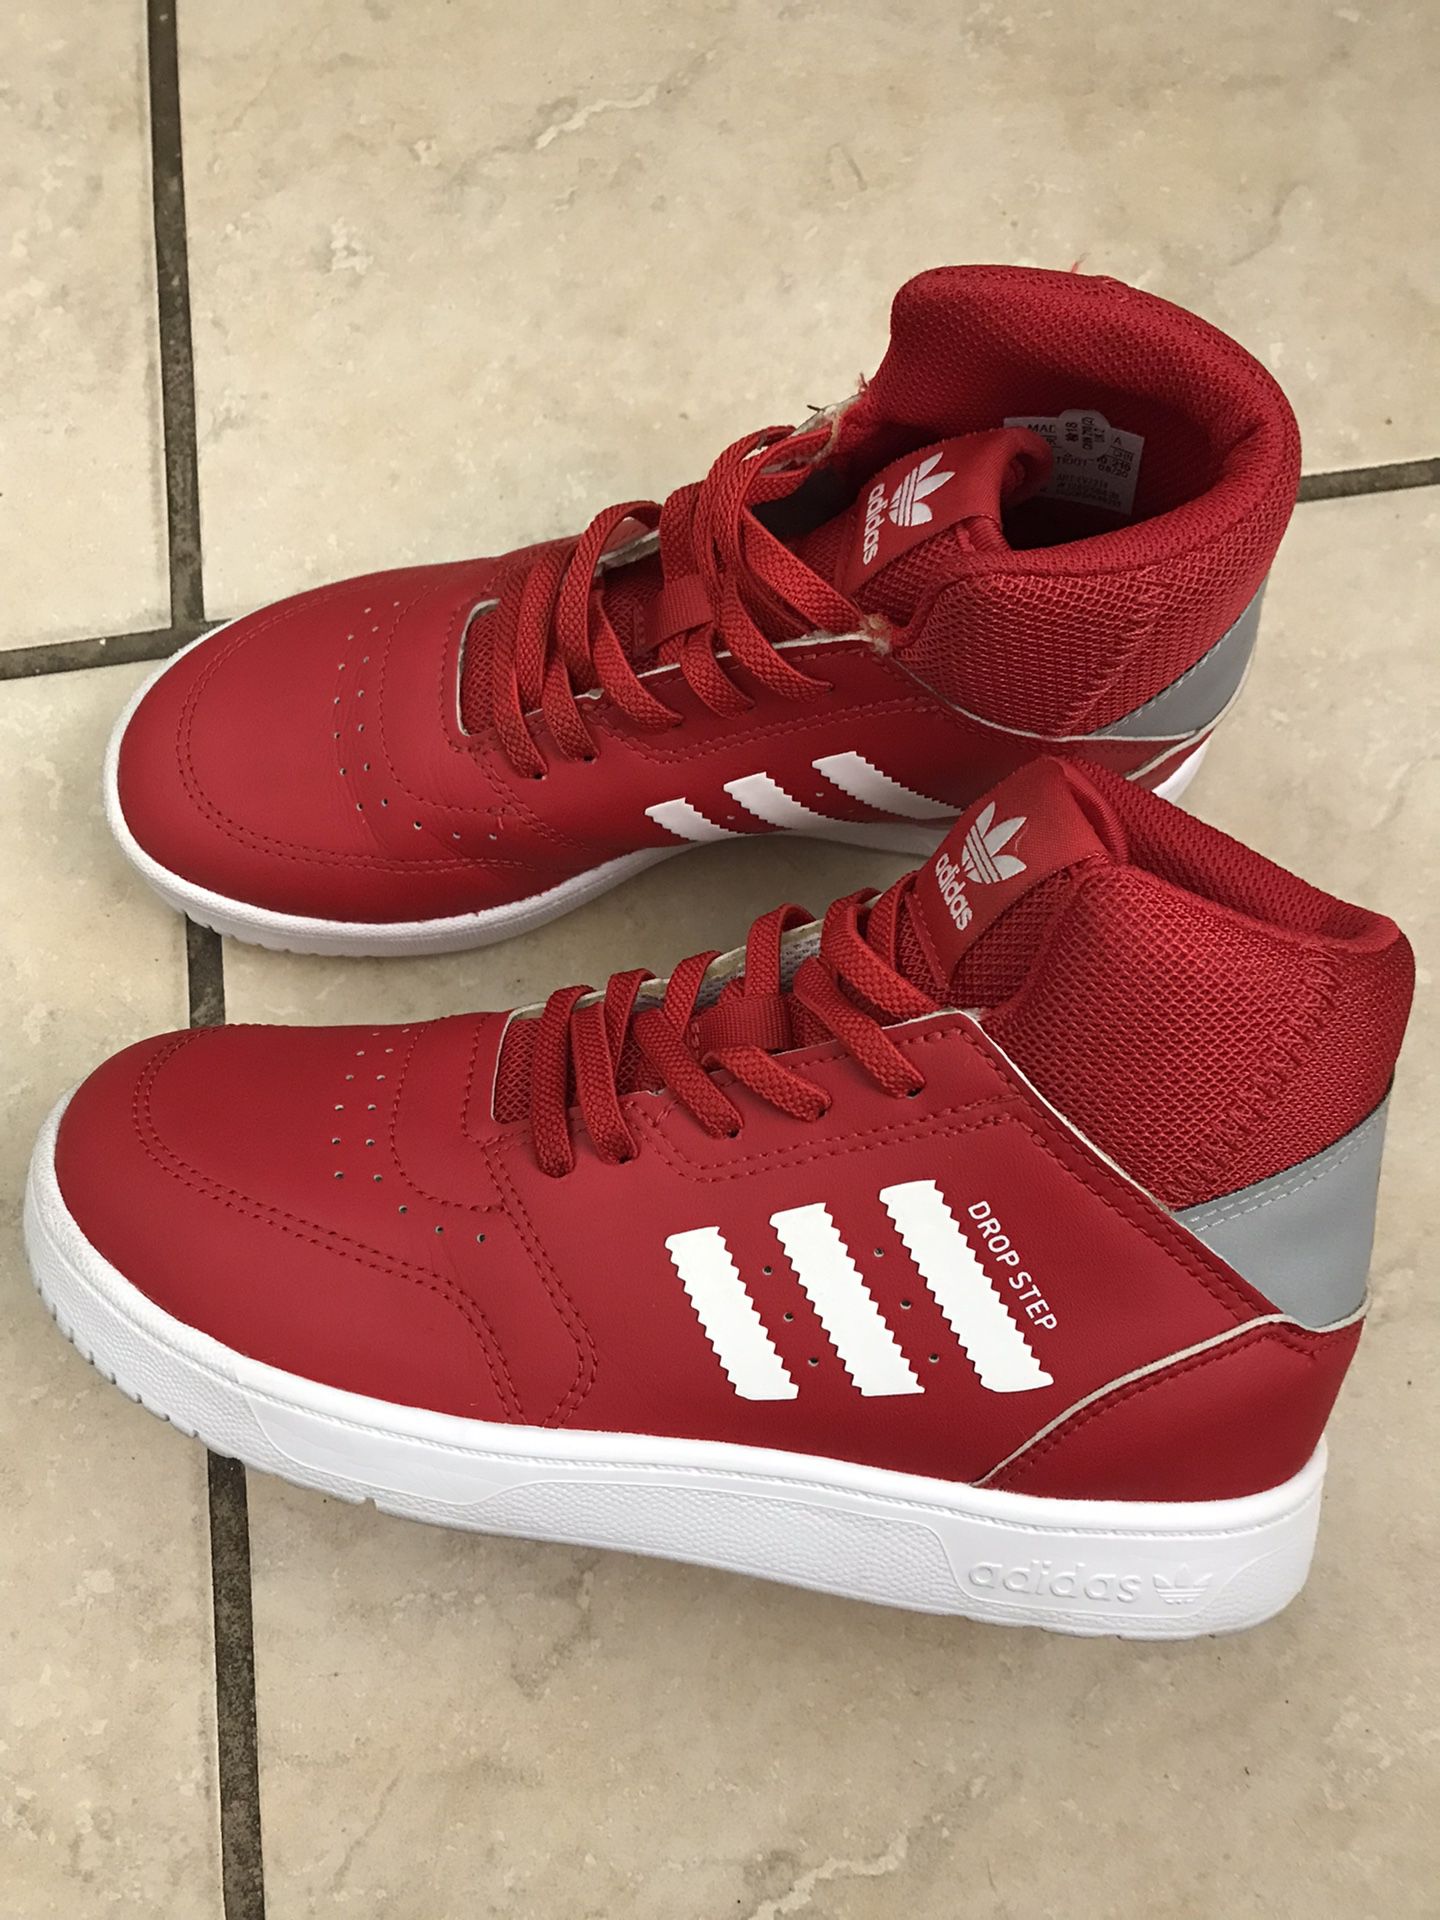 Adidas Size 21/2 Kids Perfect Condition 